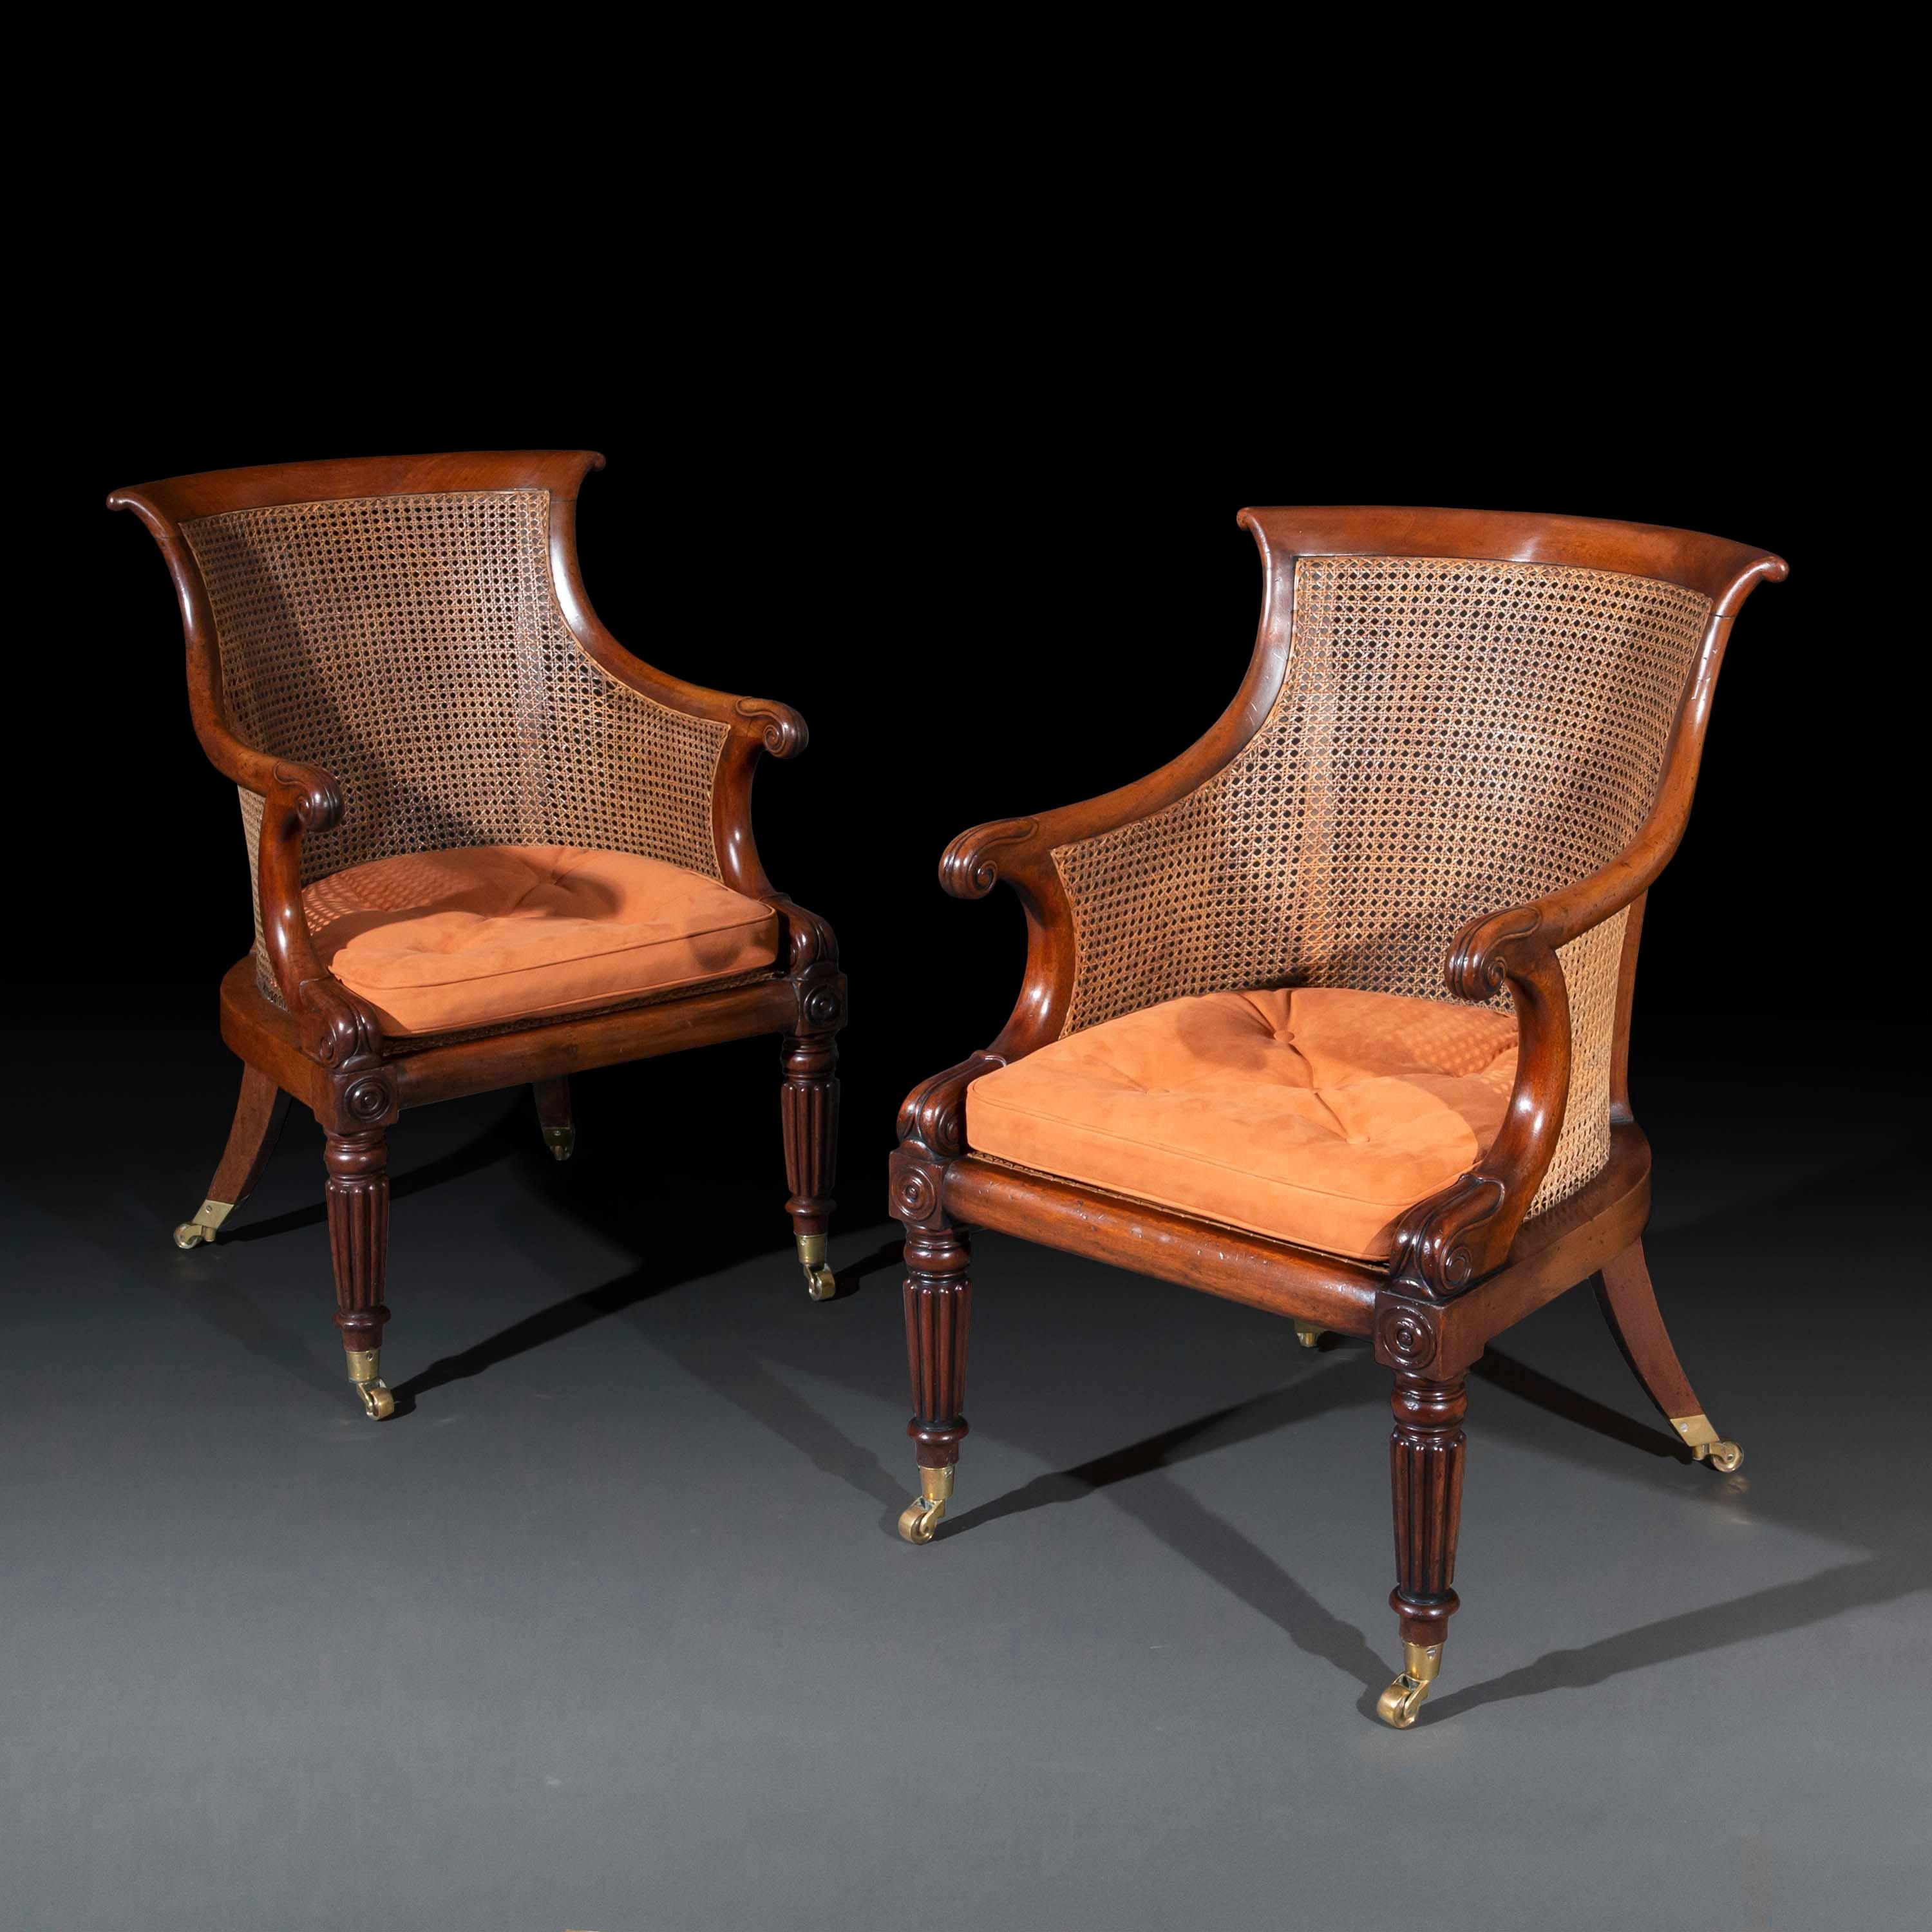 Hand-Carved Pair of Regency Bergère Armchairs in the manner of Gillows